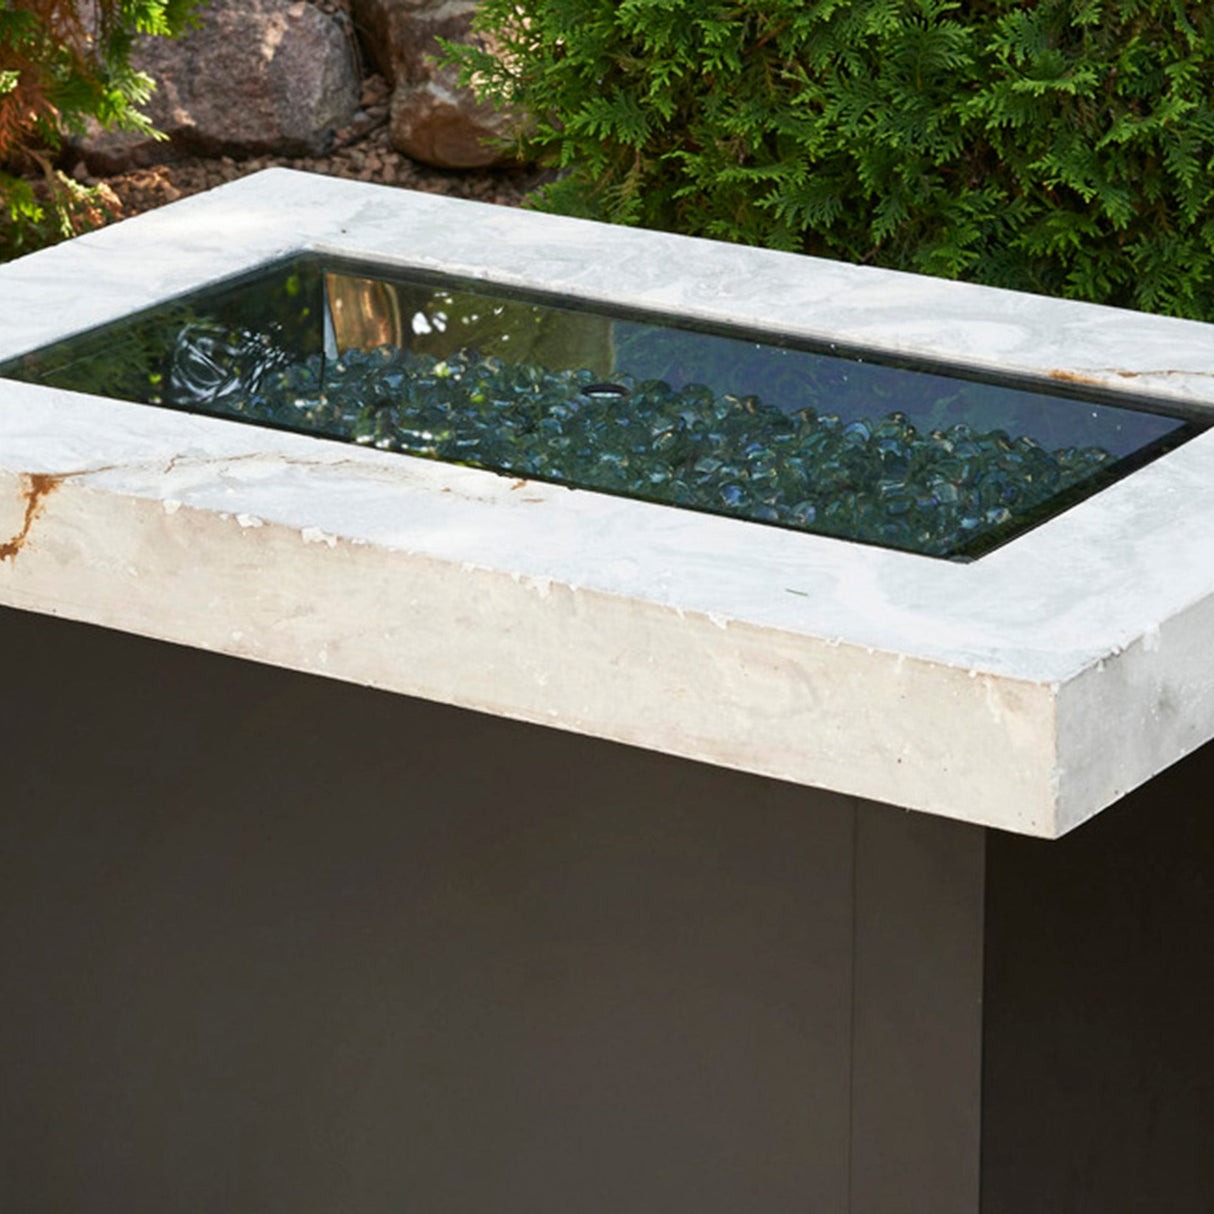 The Linear Glass Burner Cover covering a fire pit table on a patio